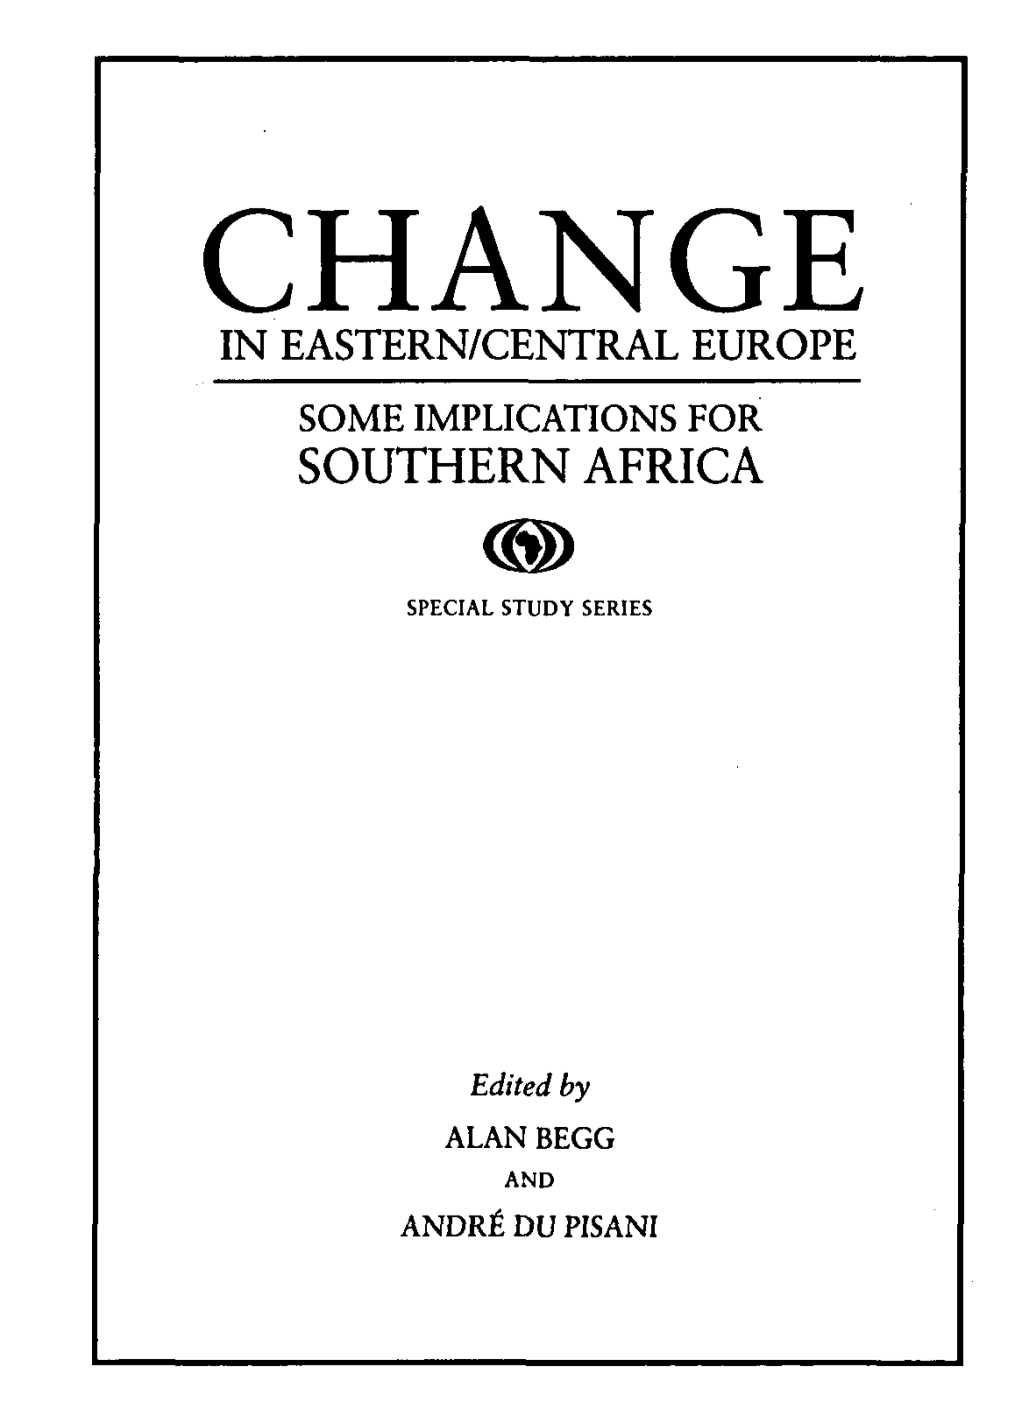 Change in Eastern/Central Europe Some Implications for Southern Africa